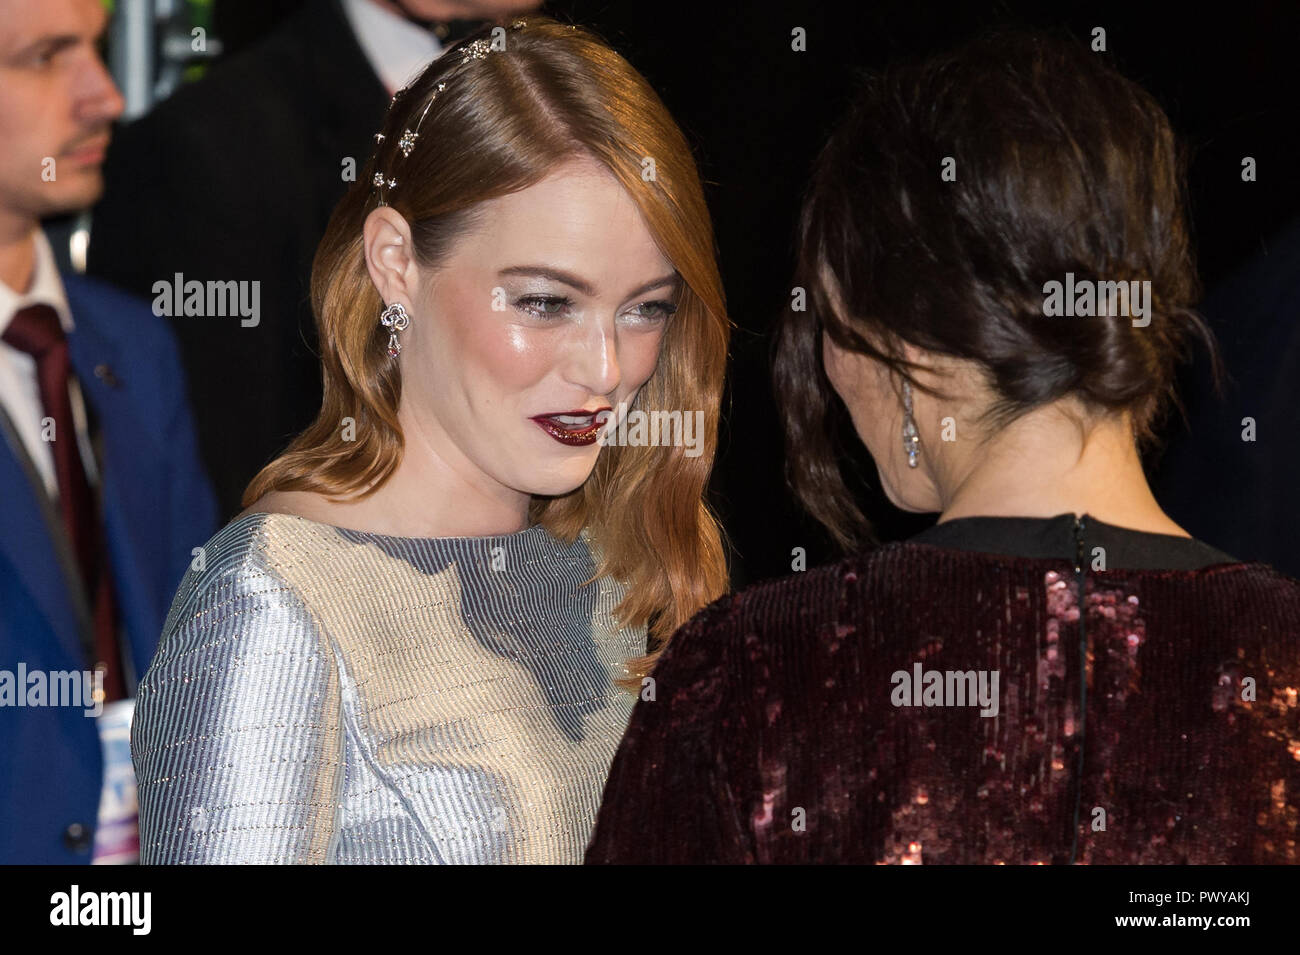 London, UK. 18th October 2018. Emma Stone (L) and Rachel Weisz (R) attend the UK film premiere of 'The Favourite' at BFI Southbank during the 62nd London Film Festival American Express Gala. Credit: Wiktor Szymanowicz/Alamy Live News Stock Photo